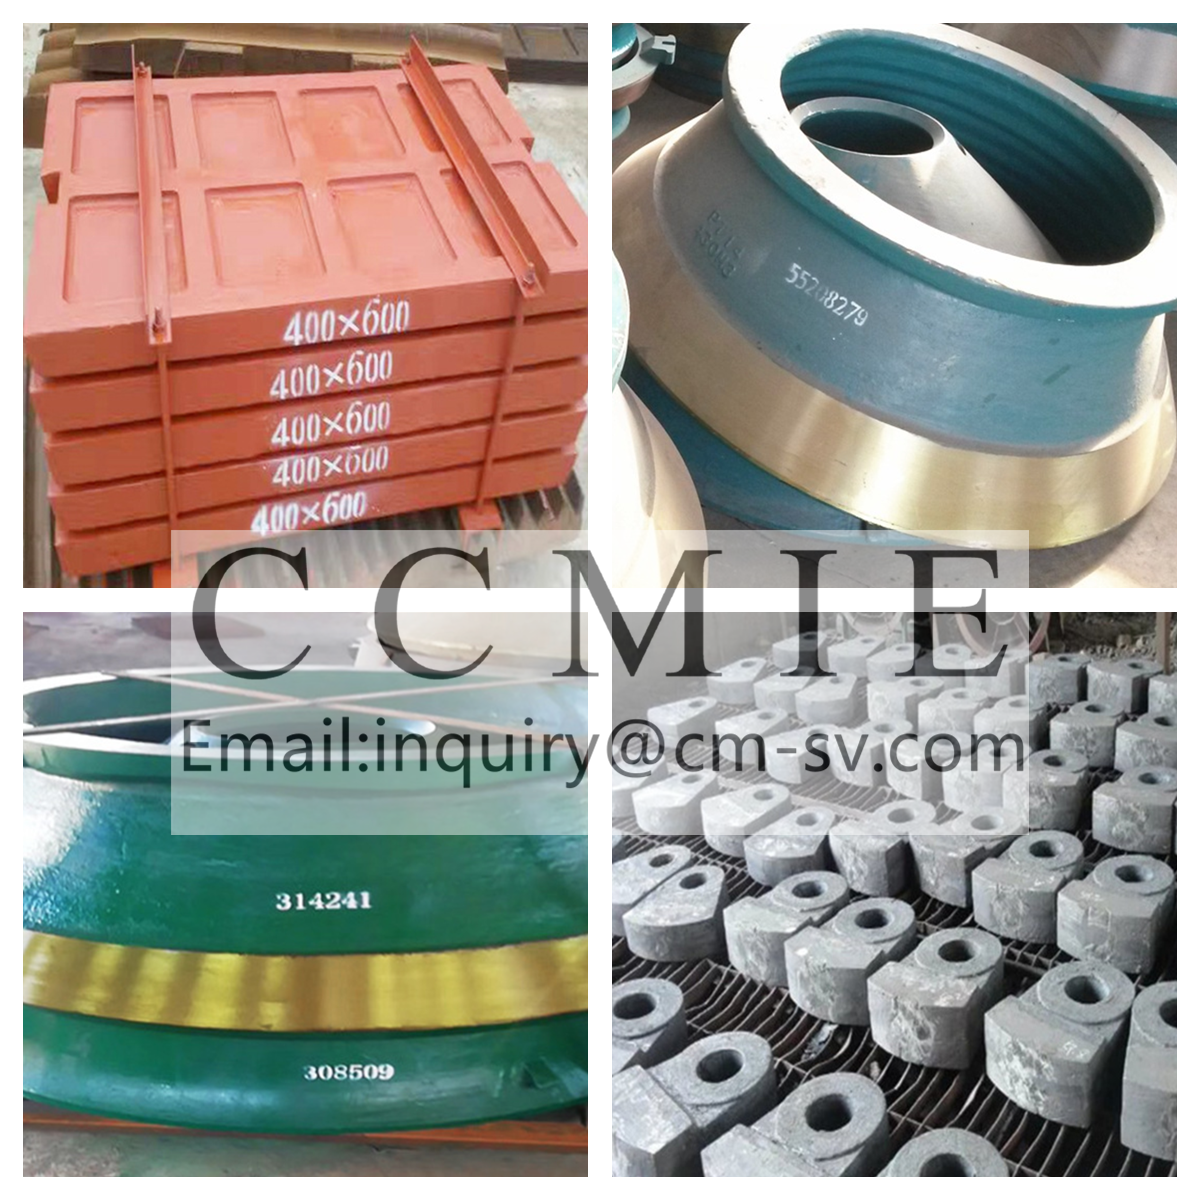 High reputation  Foton Parts  - Cone Crusher Liner for Cone Crusher – CCMIC